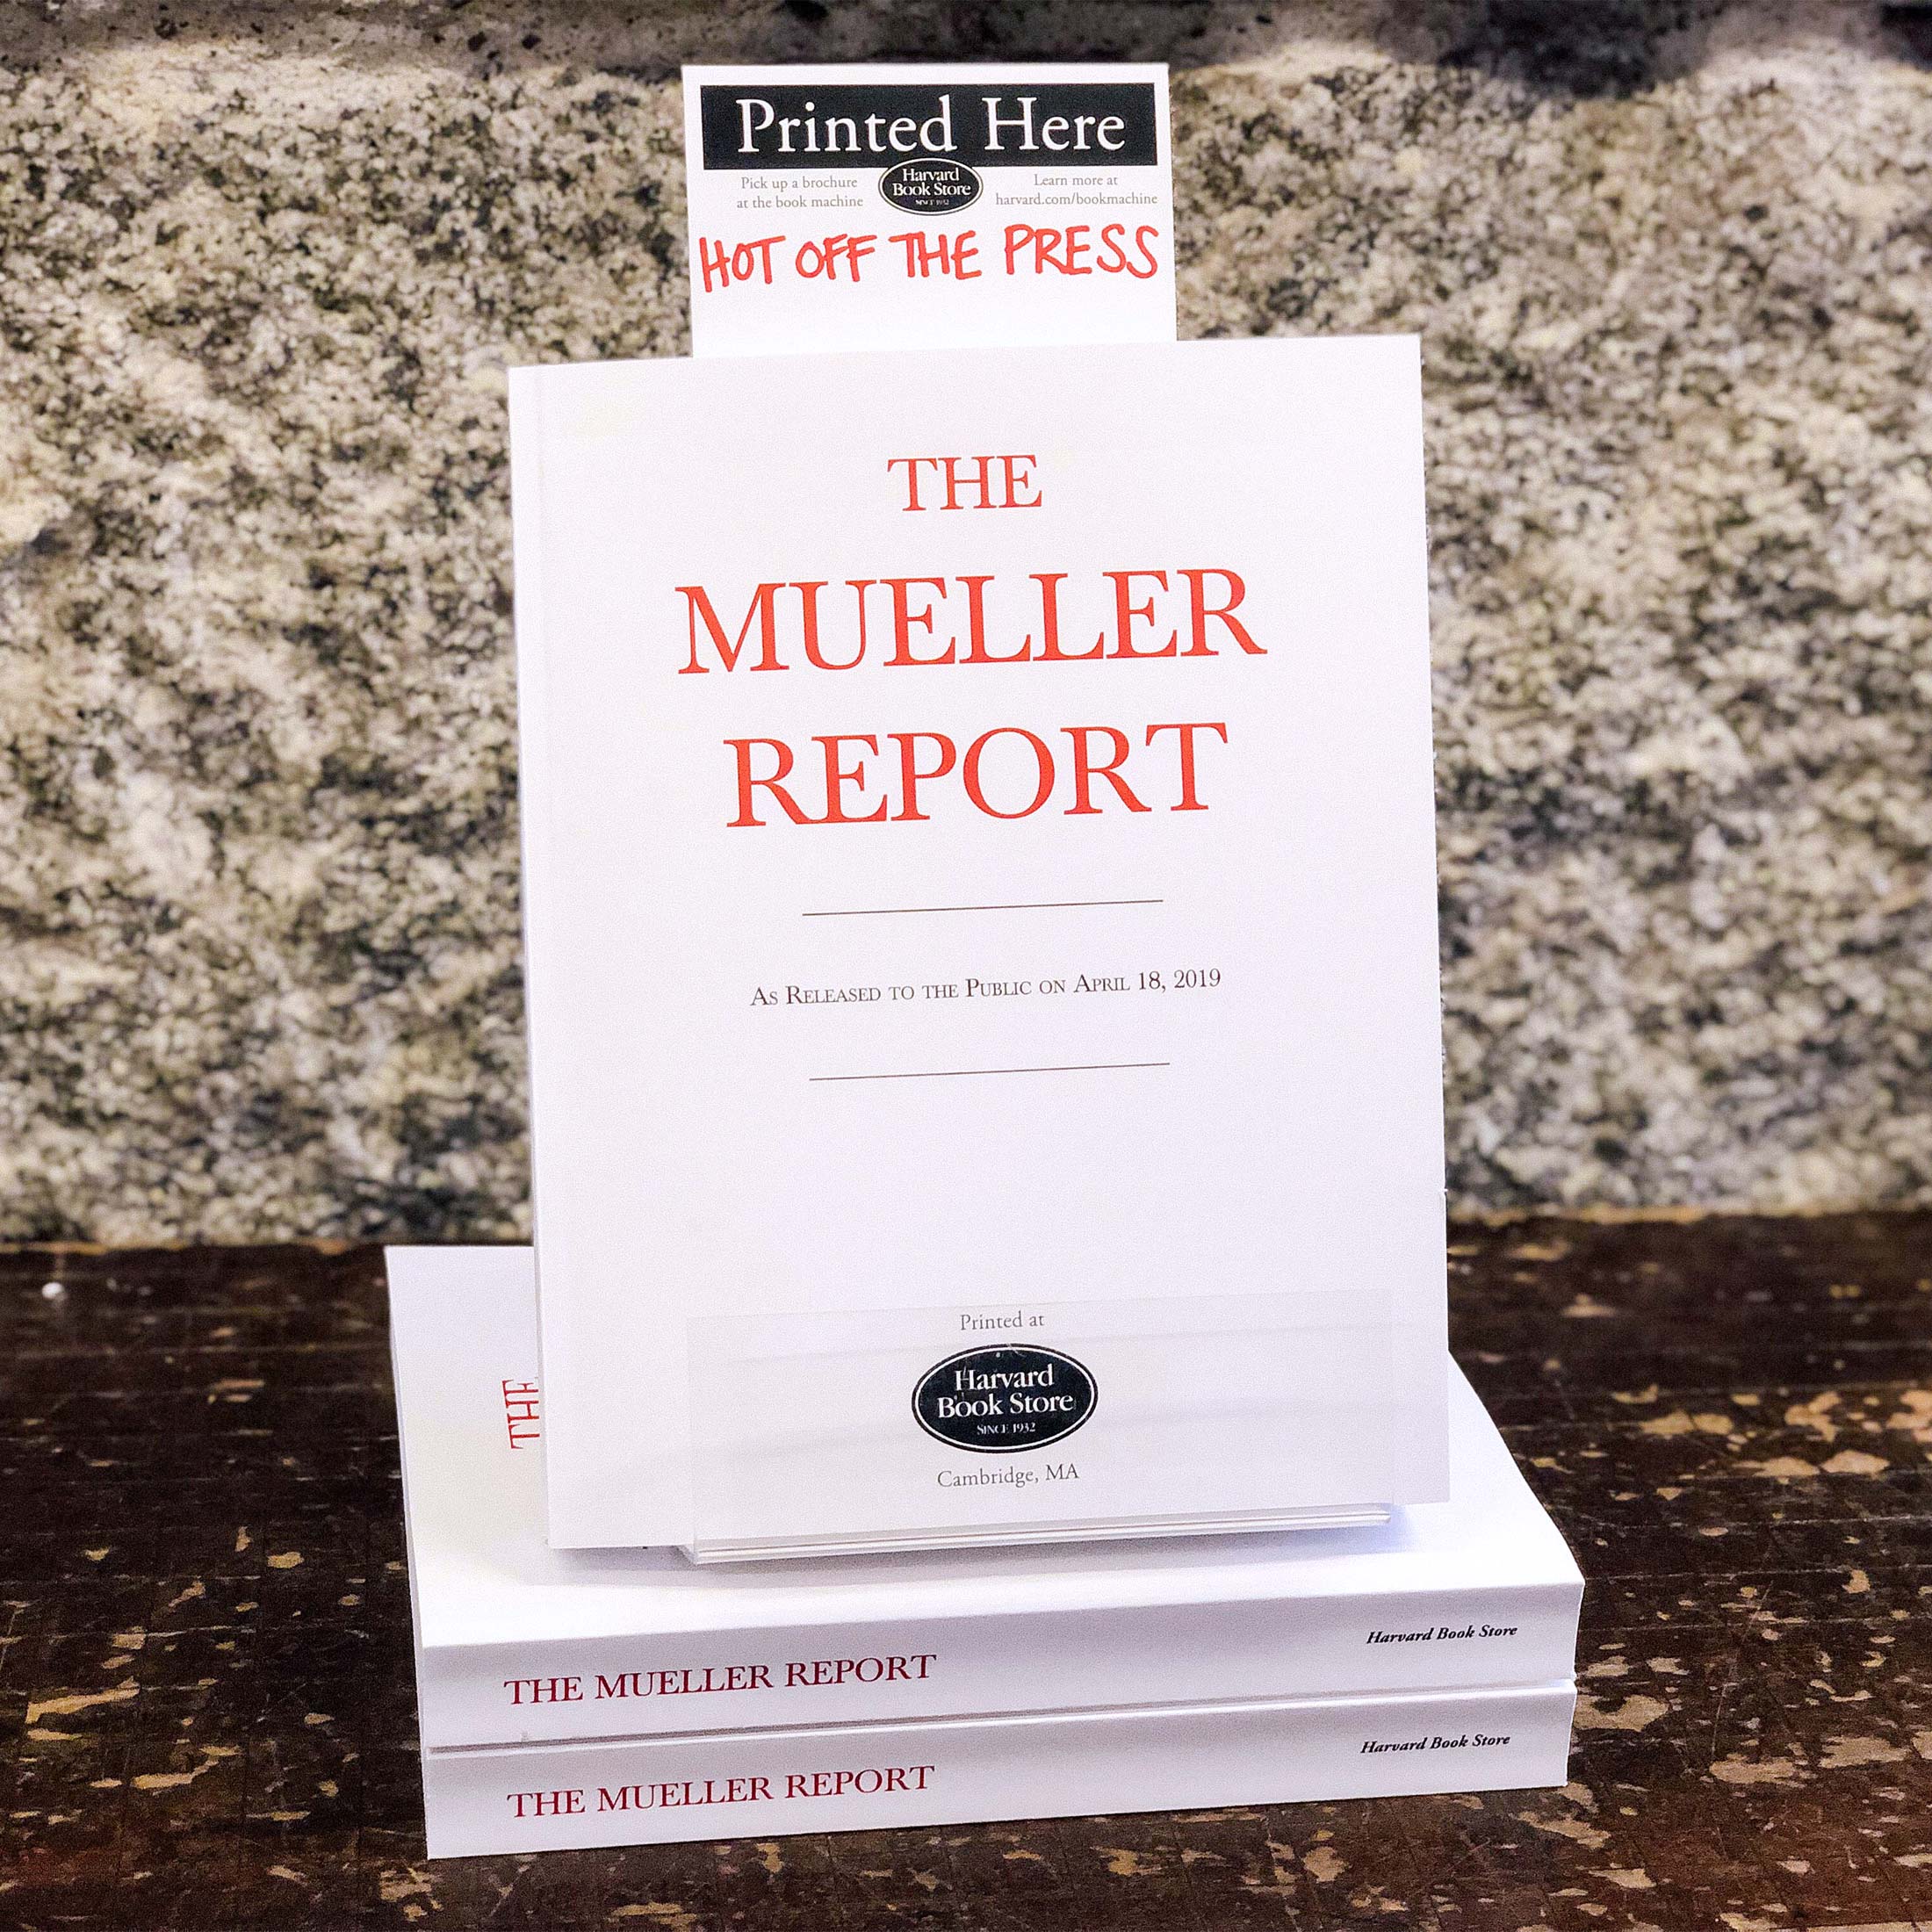 Display of bound copies of the Mueller report at the Harvard Book Store.